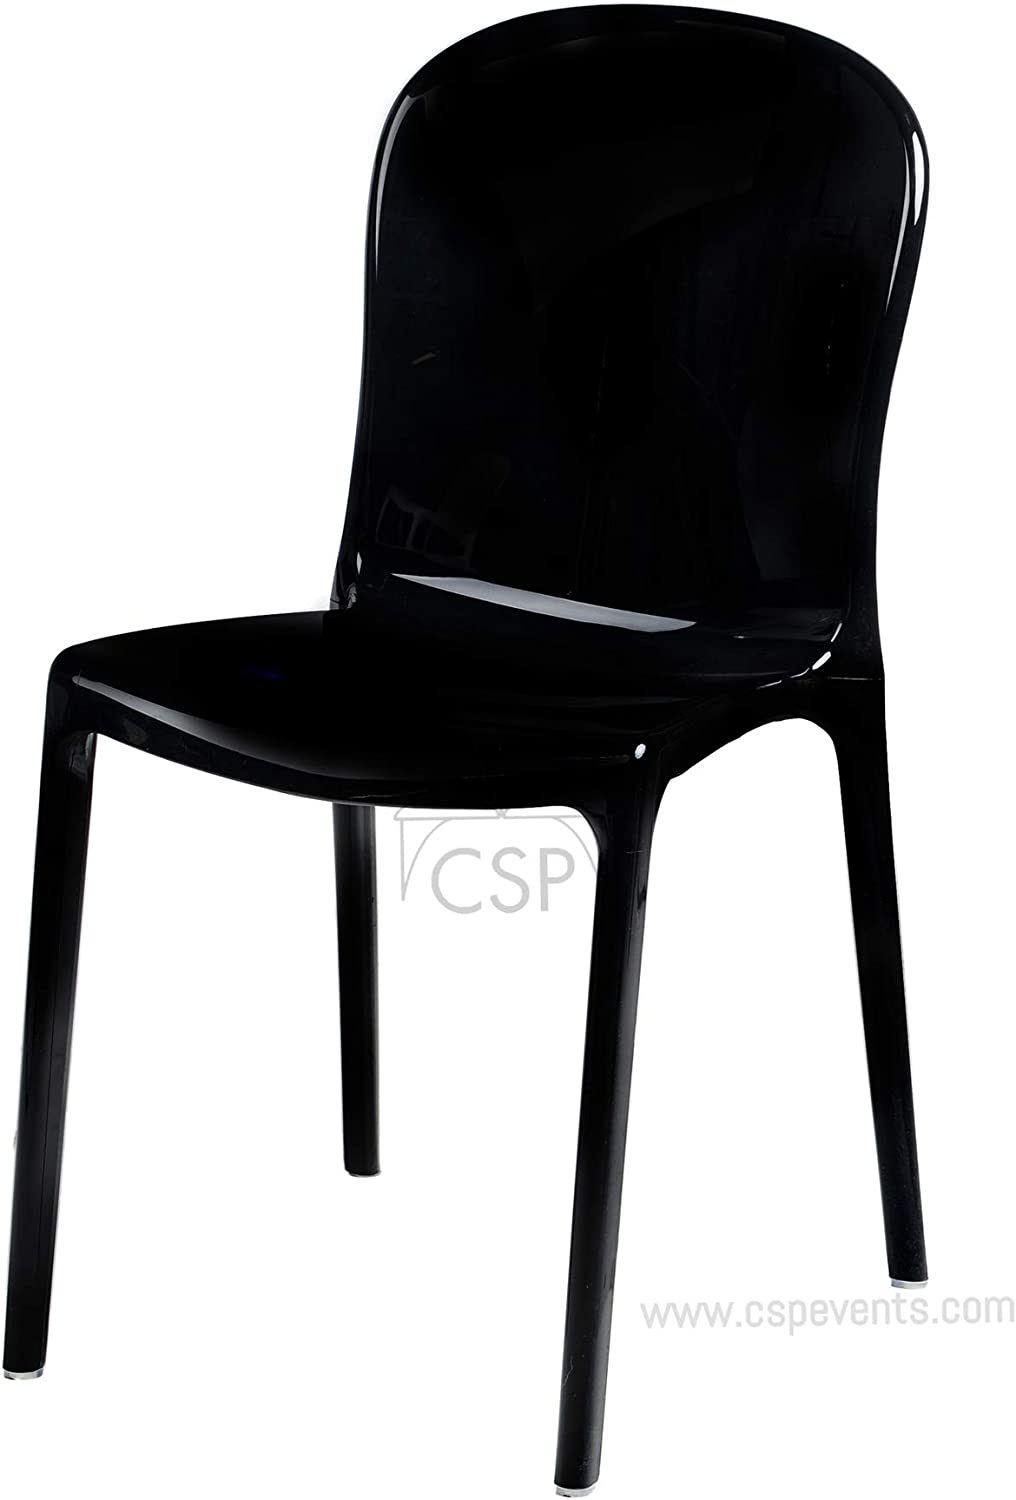 Commercial Seating Products Black Genoa Chairs